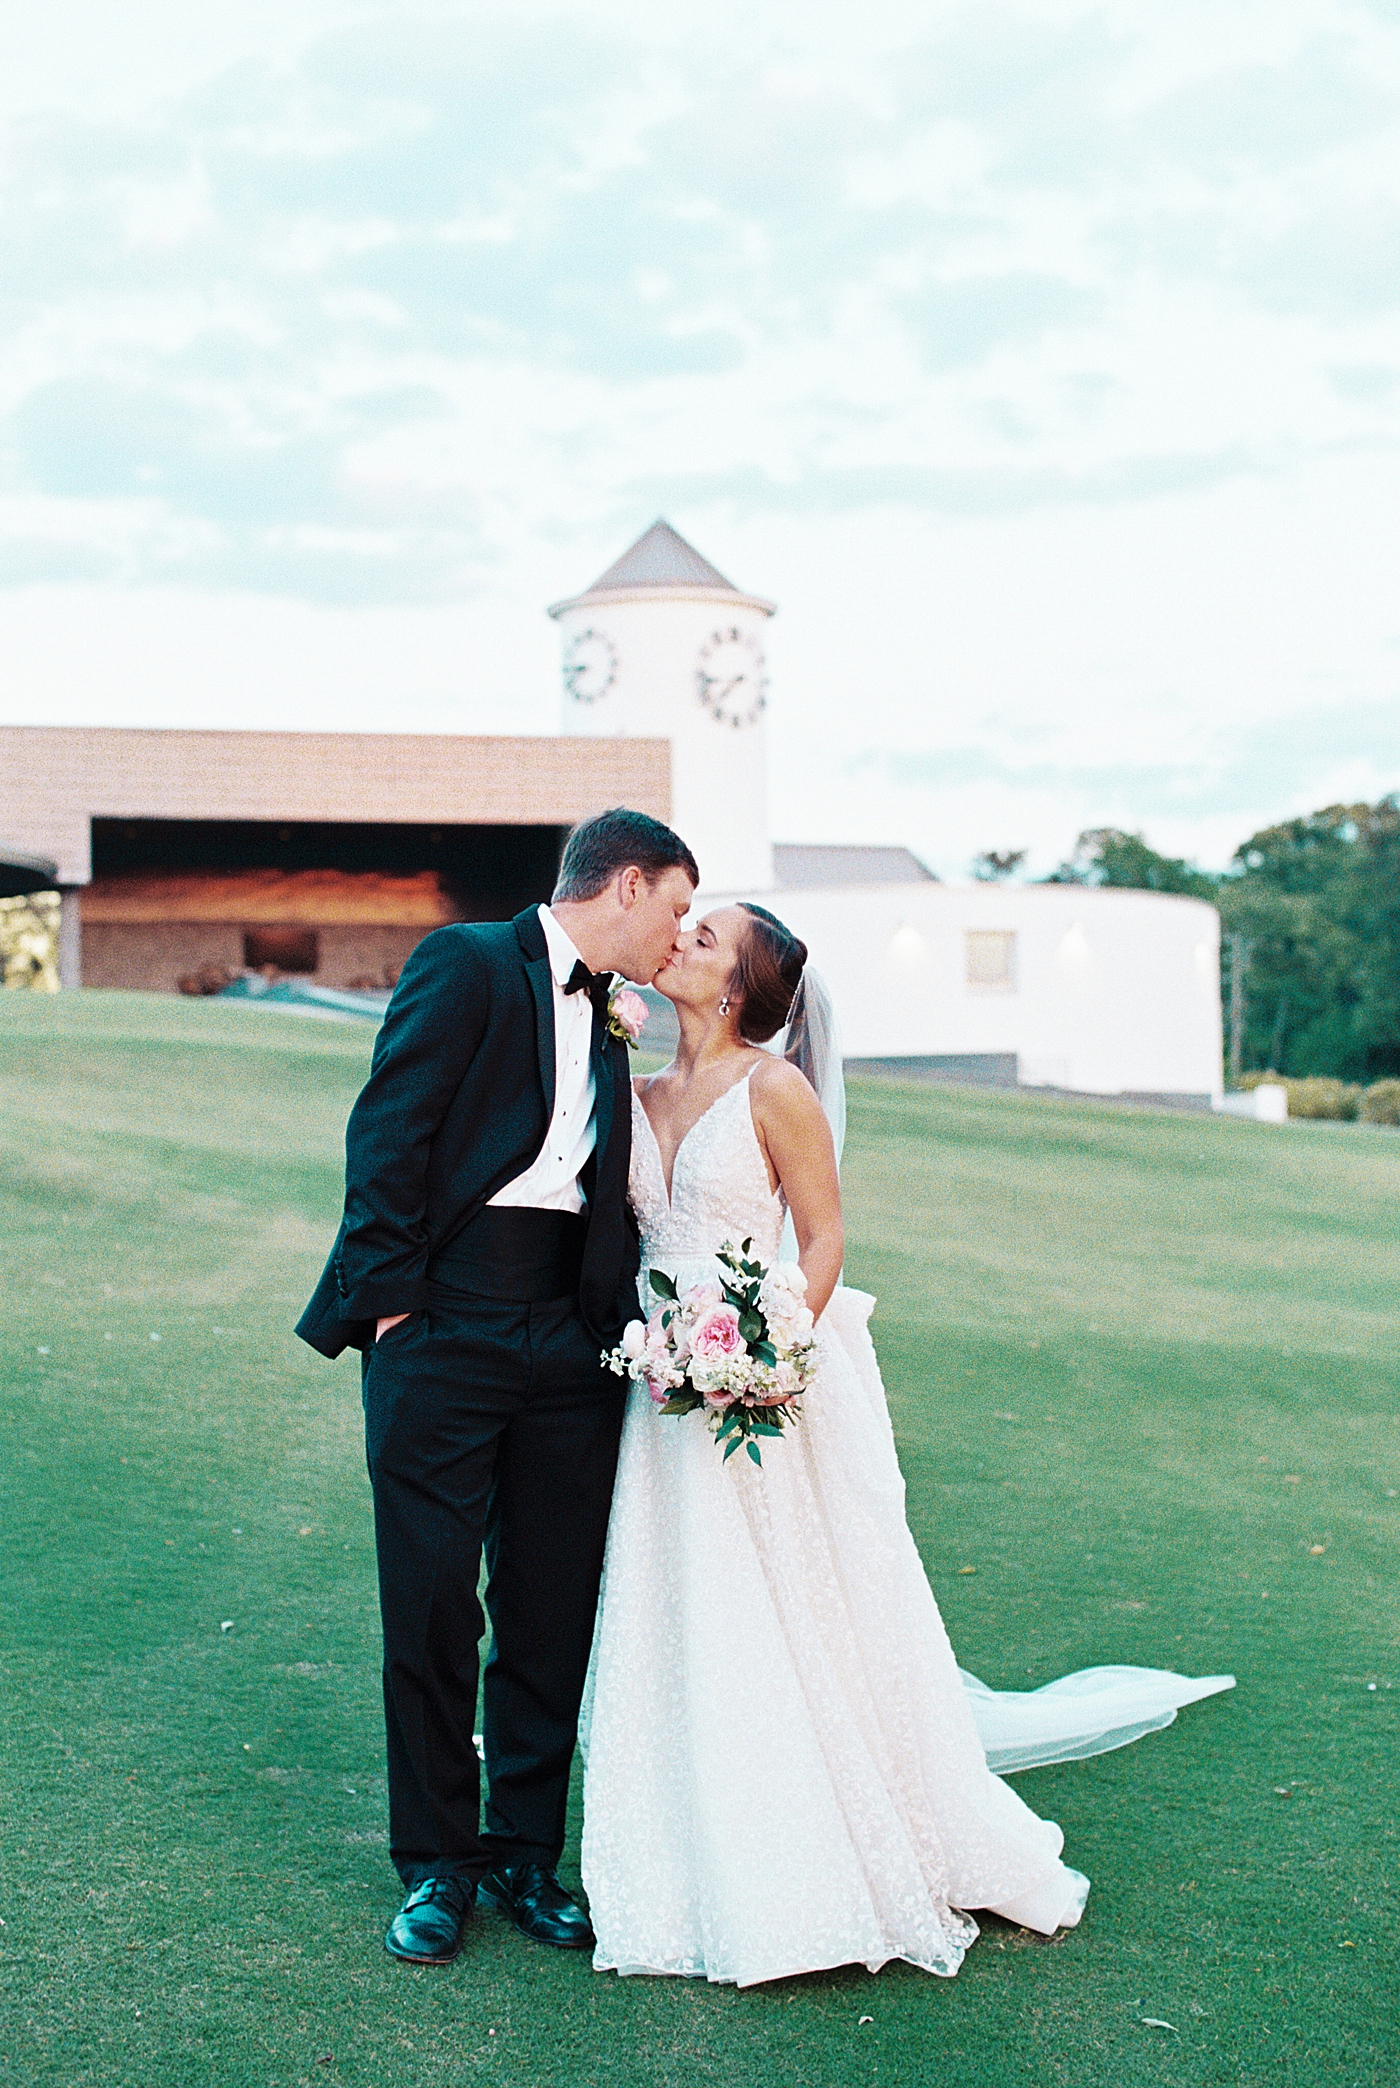 Bride and groom kissing near their wedding venue | Image by Annie Laura Photo